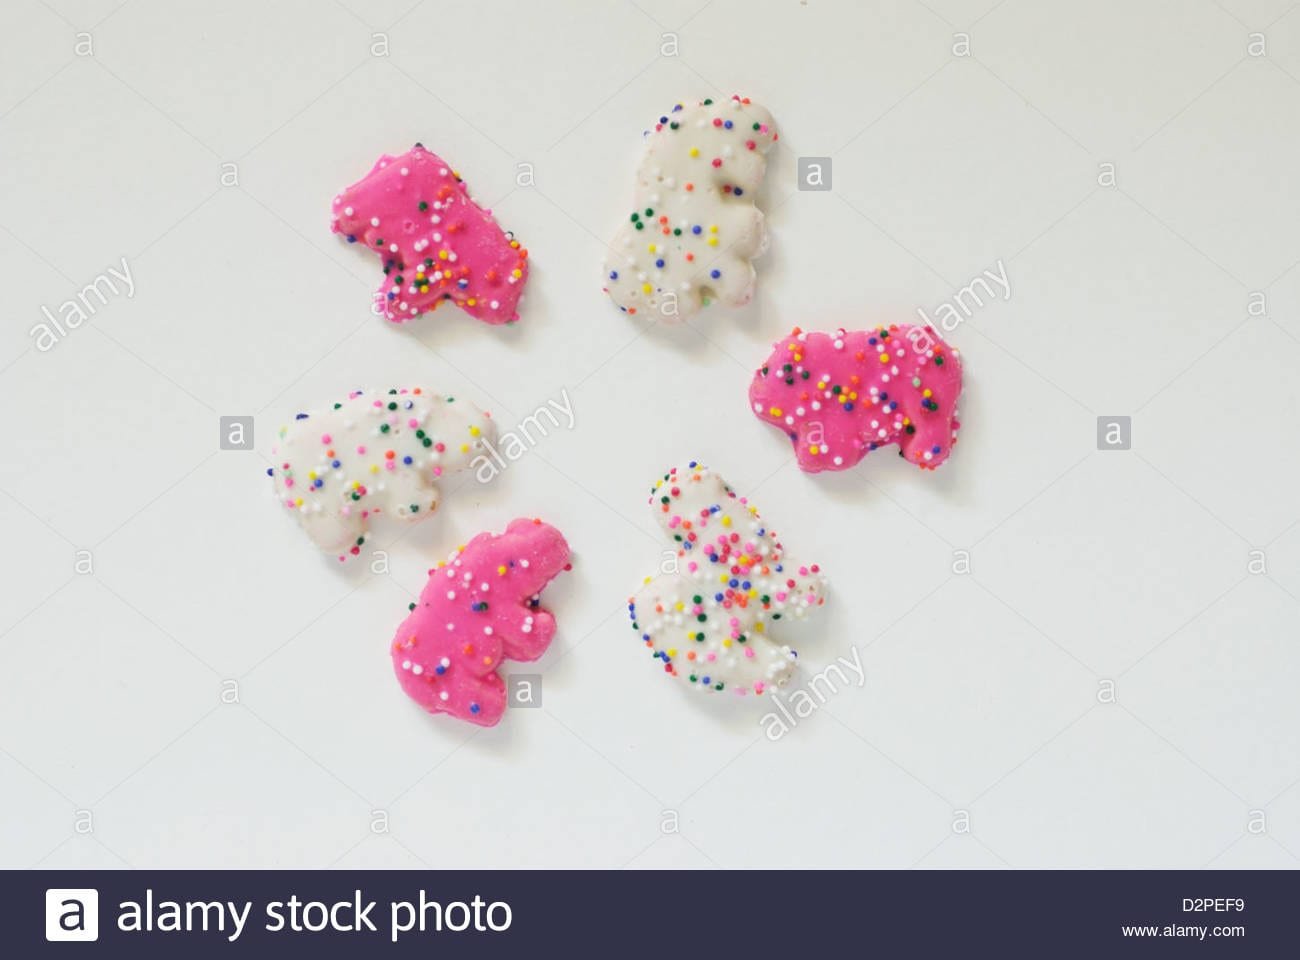 Pink And White Frosted Animal Cookies On White Background Stock